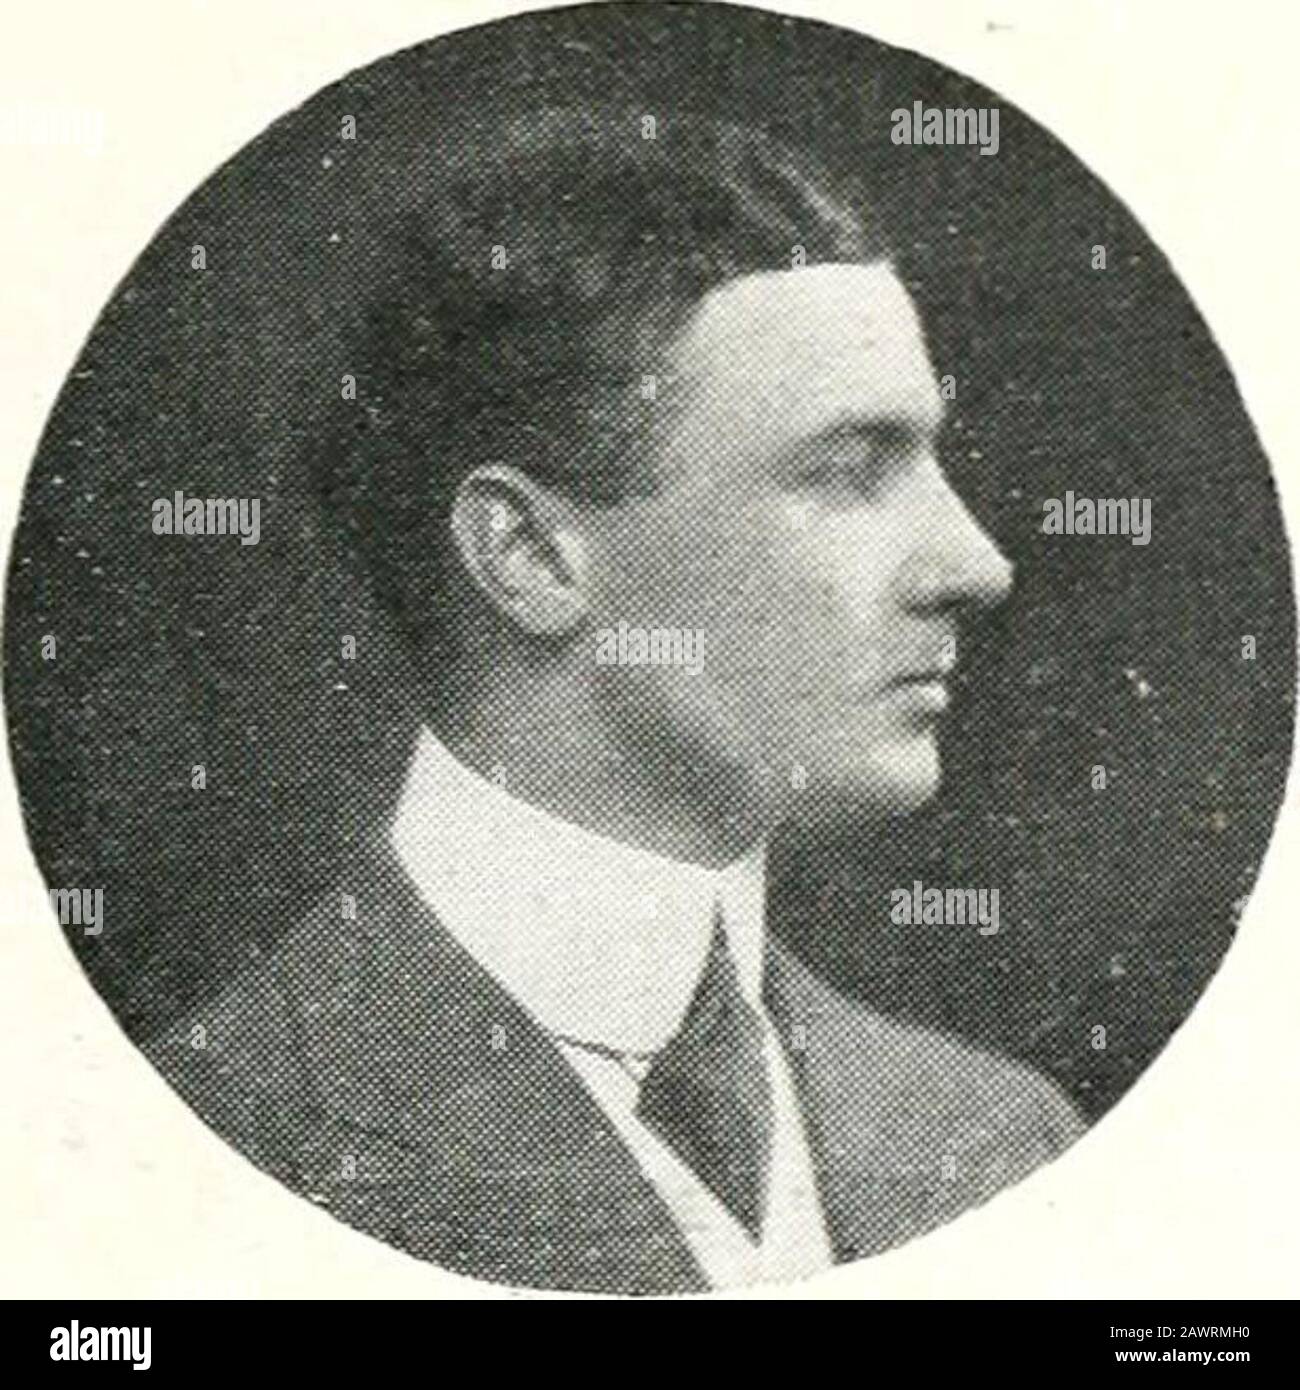 Photographic pedigree of the descendants of Isaac and Rachel Wilson . 1909 1909 JONATHAN Frederick Braithwaite, born at Camden Road, London, on 9thAugust, 1883. Educated at Reading and Dalton Hall, Manchester.Partner in Messrs. Foster eV Braithwaite, Stockbrokers. Married at FriendsMeeting, Saffron Walden, on 22nd July, 1909, Marjorie Susanna Midgley,daughter of Arthur Midgley and his wile Mary Doncaster Cox. She wasborn at Larchmount, Saffron Walden, on 3rd December, 1884. Address : Caerleon, Willenhall Park, New Barnet, Herts. Issue—One son, . (a) Frederick Arthur Bevan Braithwaite, born at Stock Photo